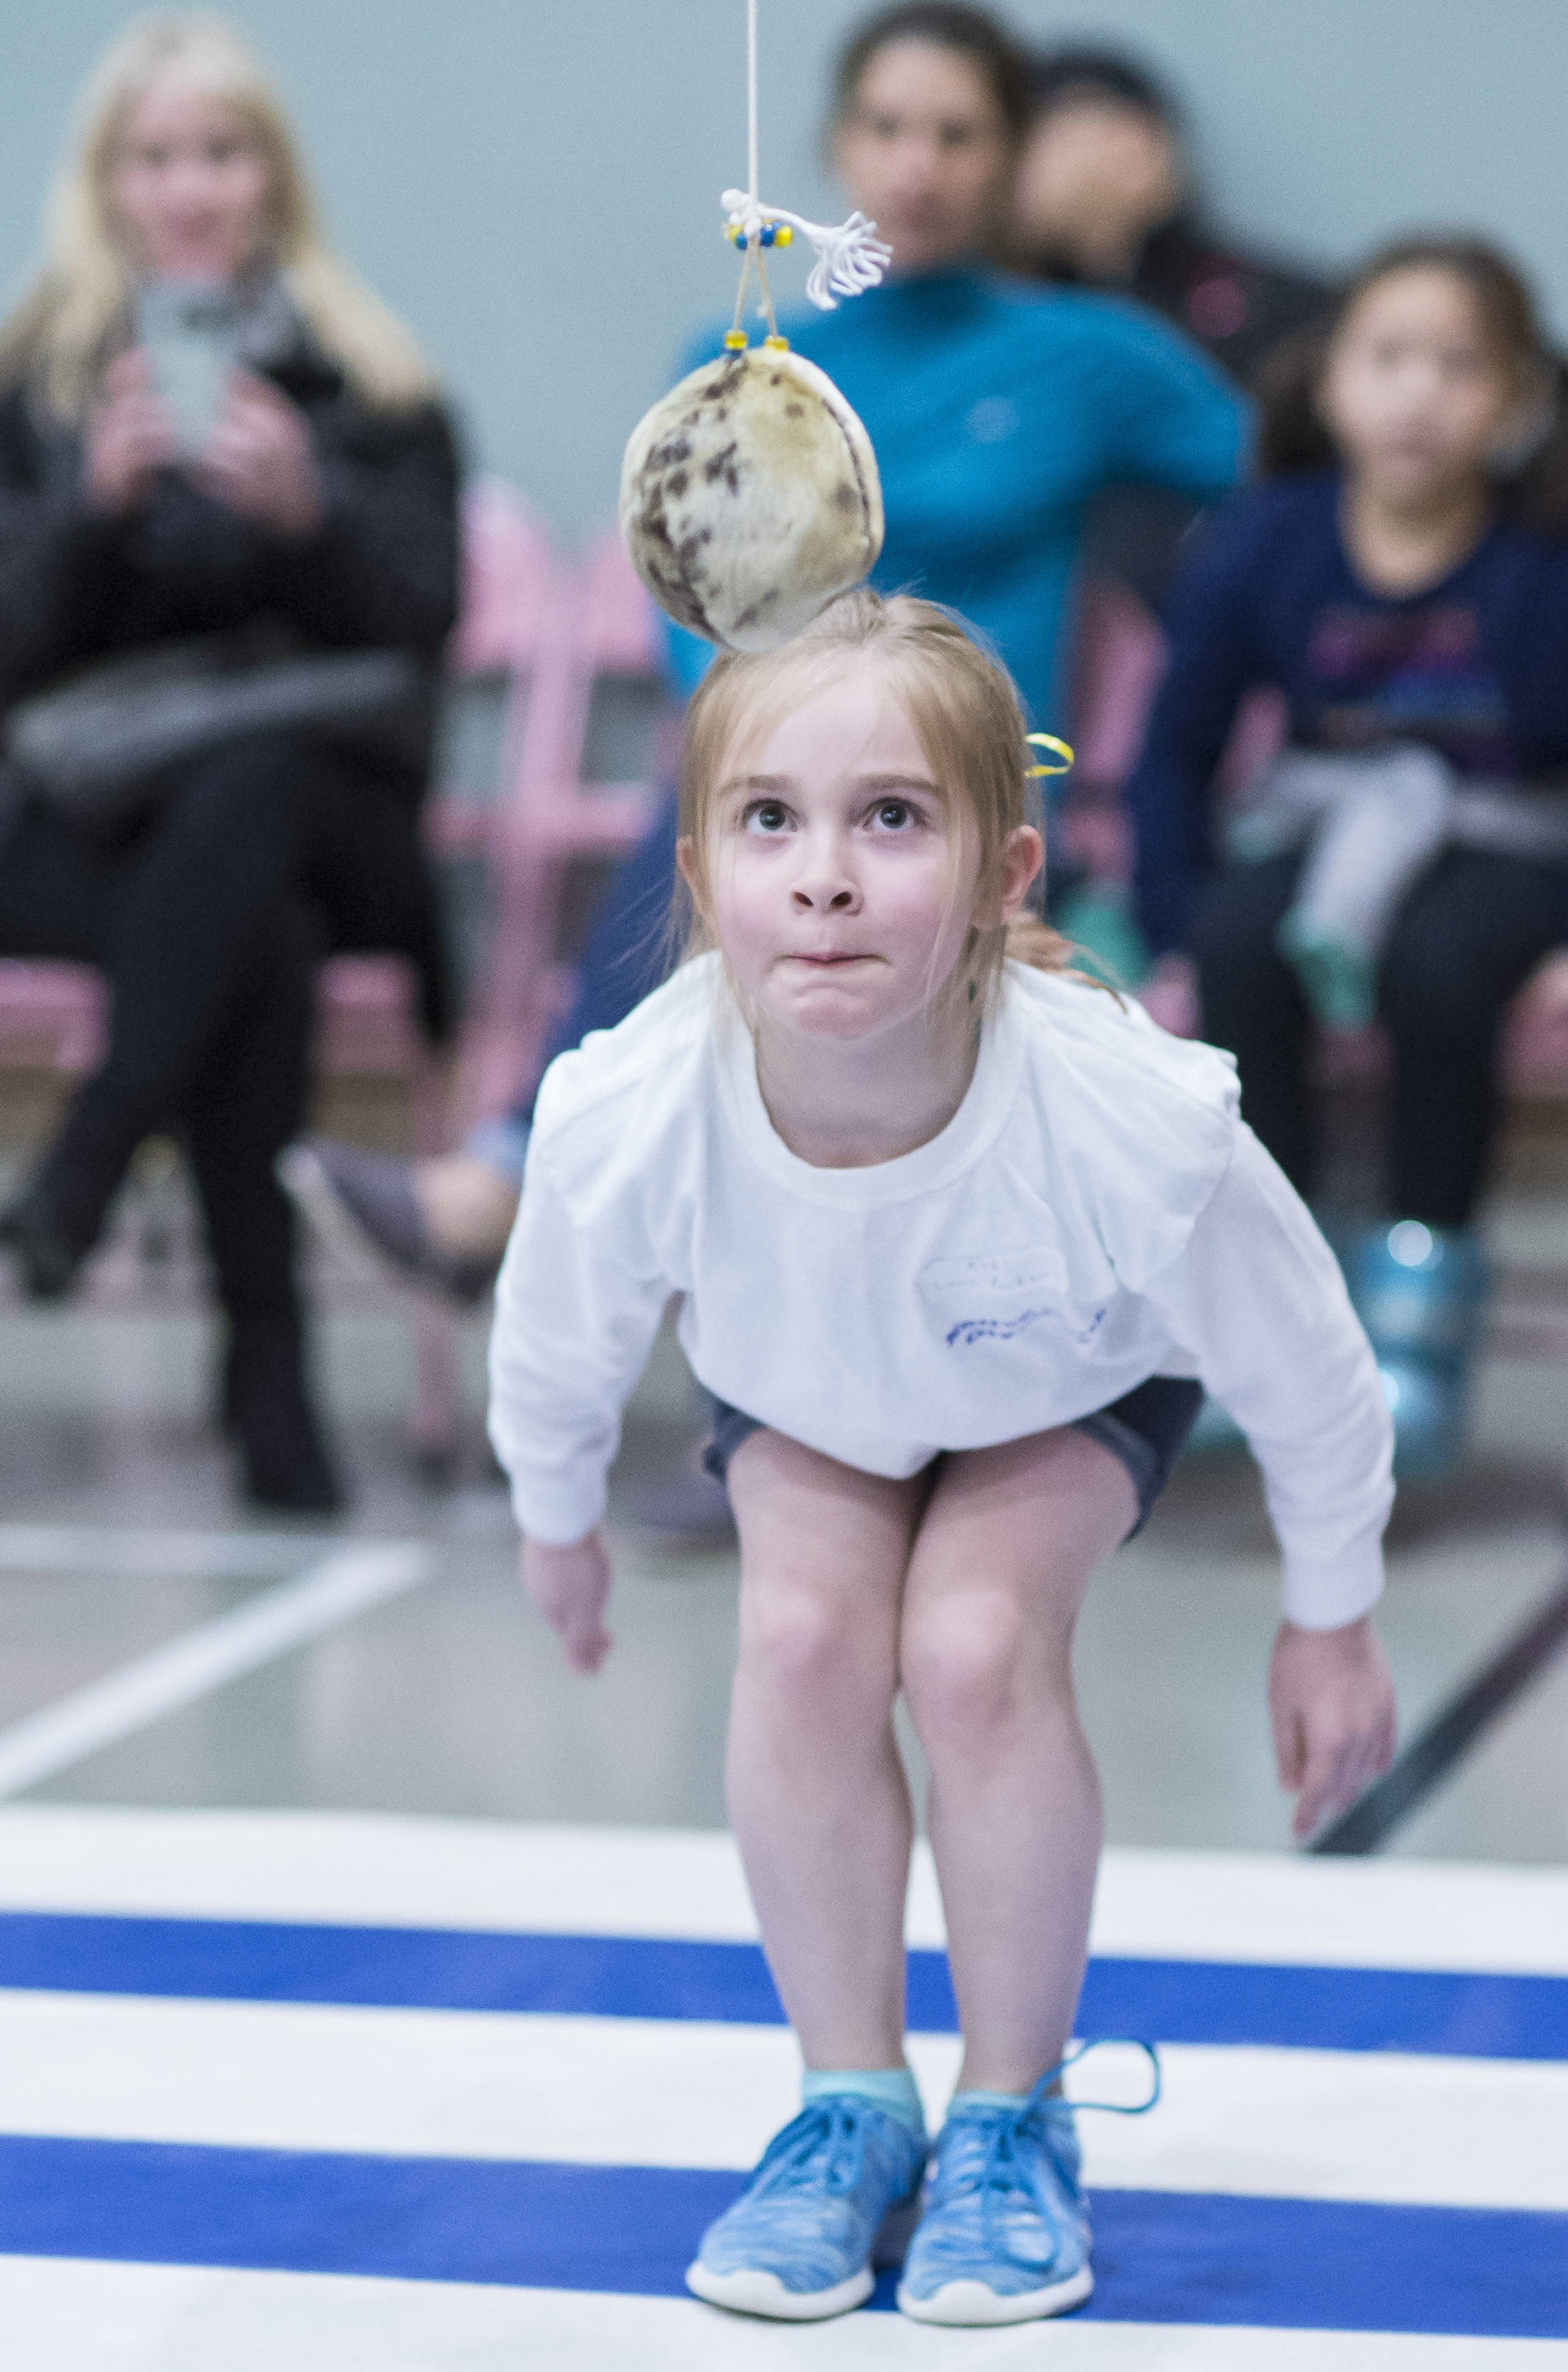 Second-grader Laura Parker, of Riverbend Elementary School, concentrates on her Alaska high kick during the Native Youth Olympics at Riverbend Elementary School on Friday, Feb. 9, 2018. (Michael Penn | Juneau Empire)